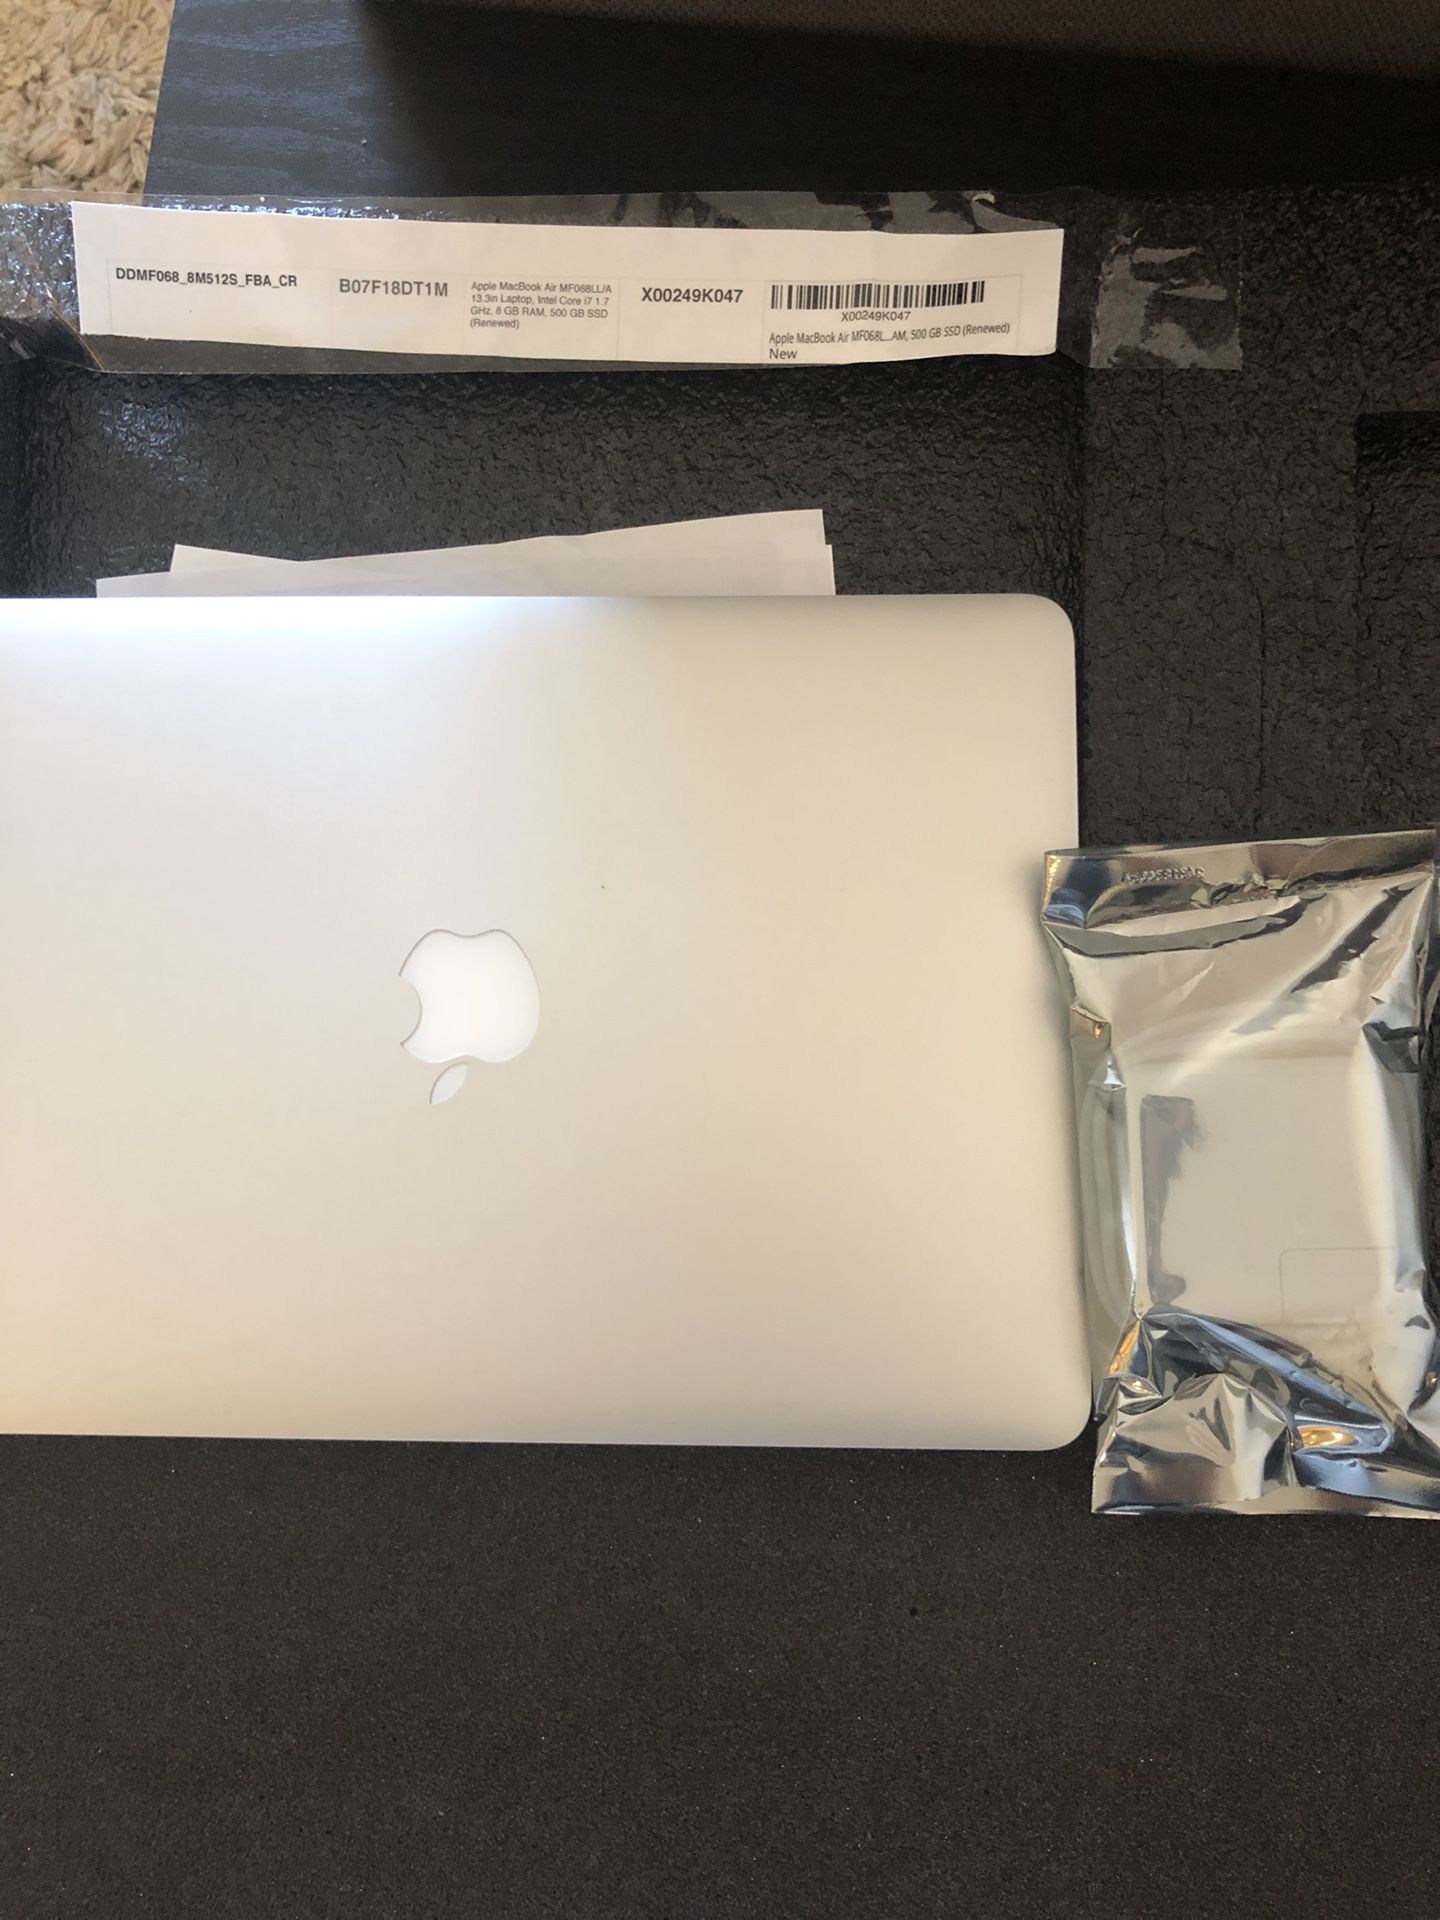 Brand New Apple MacBook Air 13.3-inch 2.2GHz Cote i7 8 GB RAM 512 GB ReNewed Now for Only $850!!